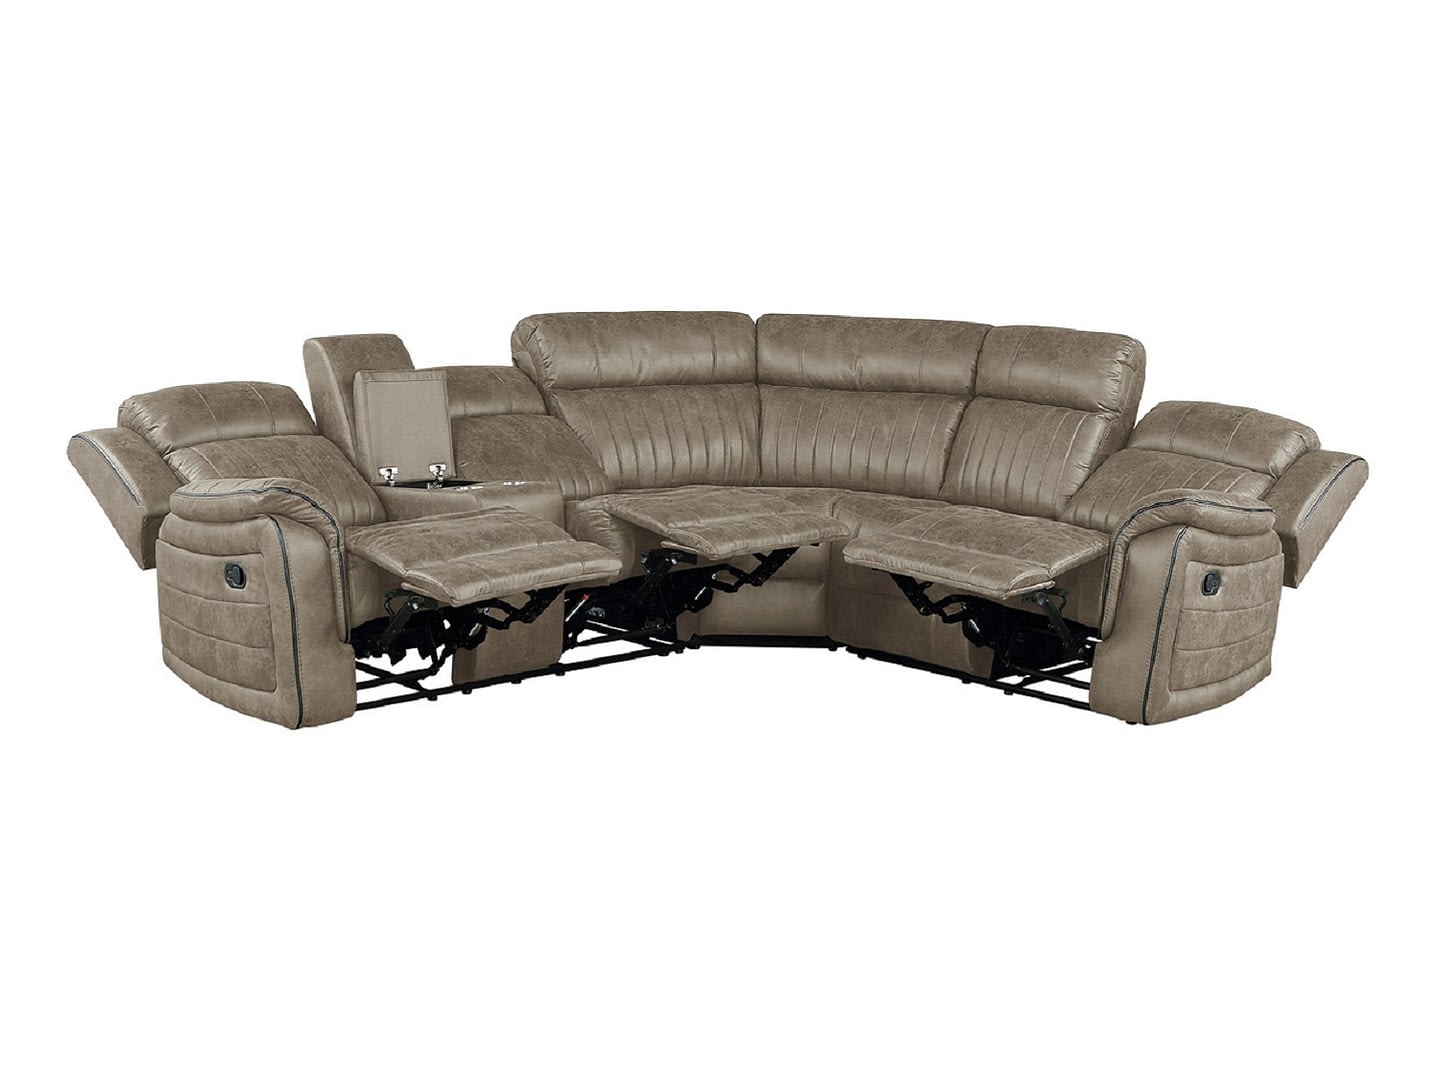 FERNLY Reclining Sectional with Console - Open